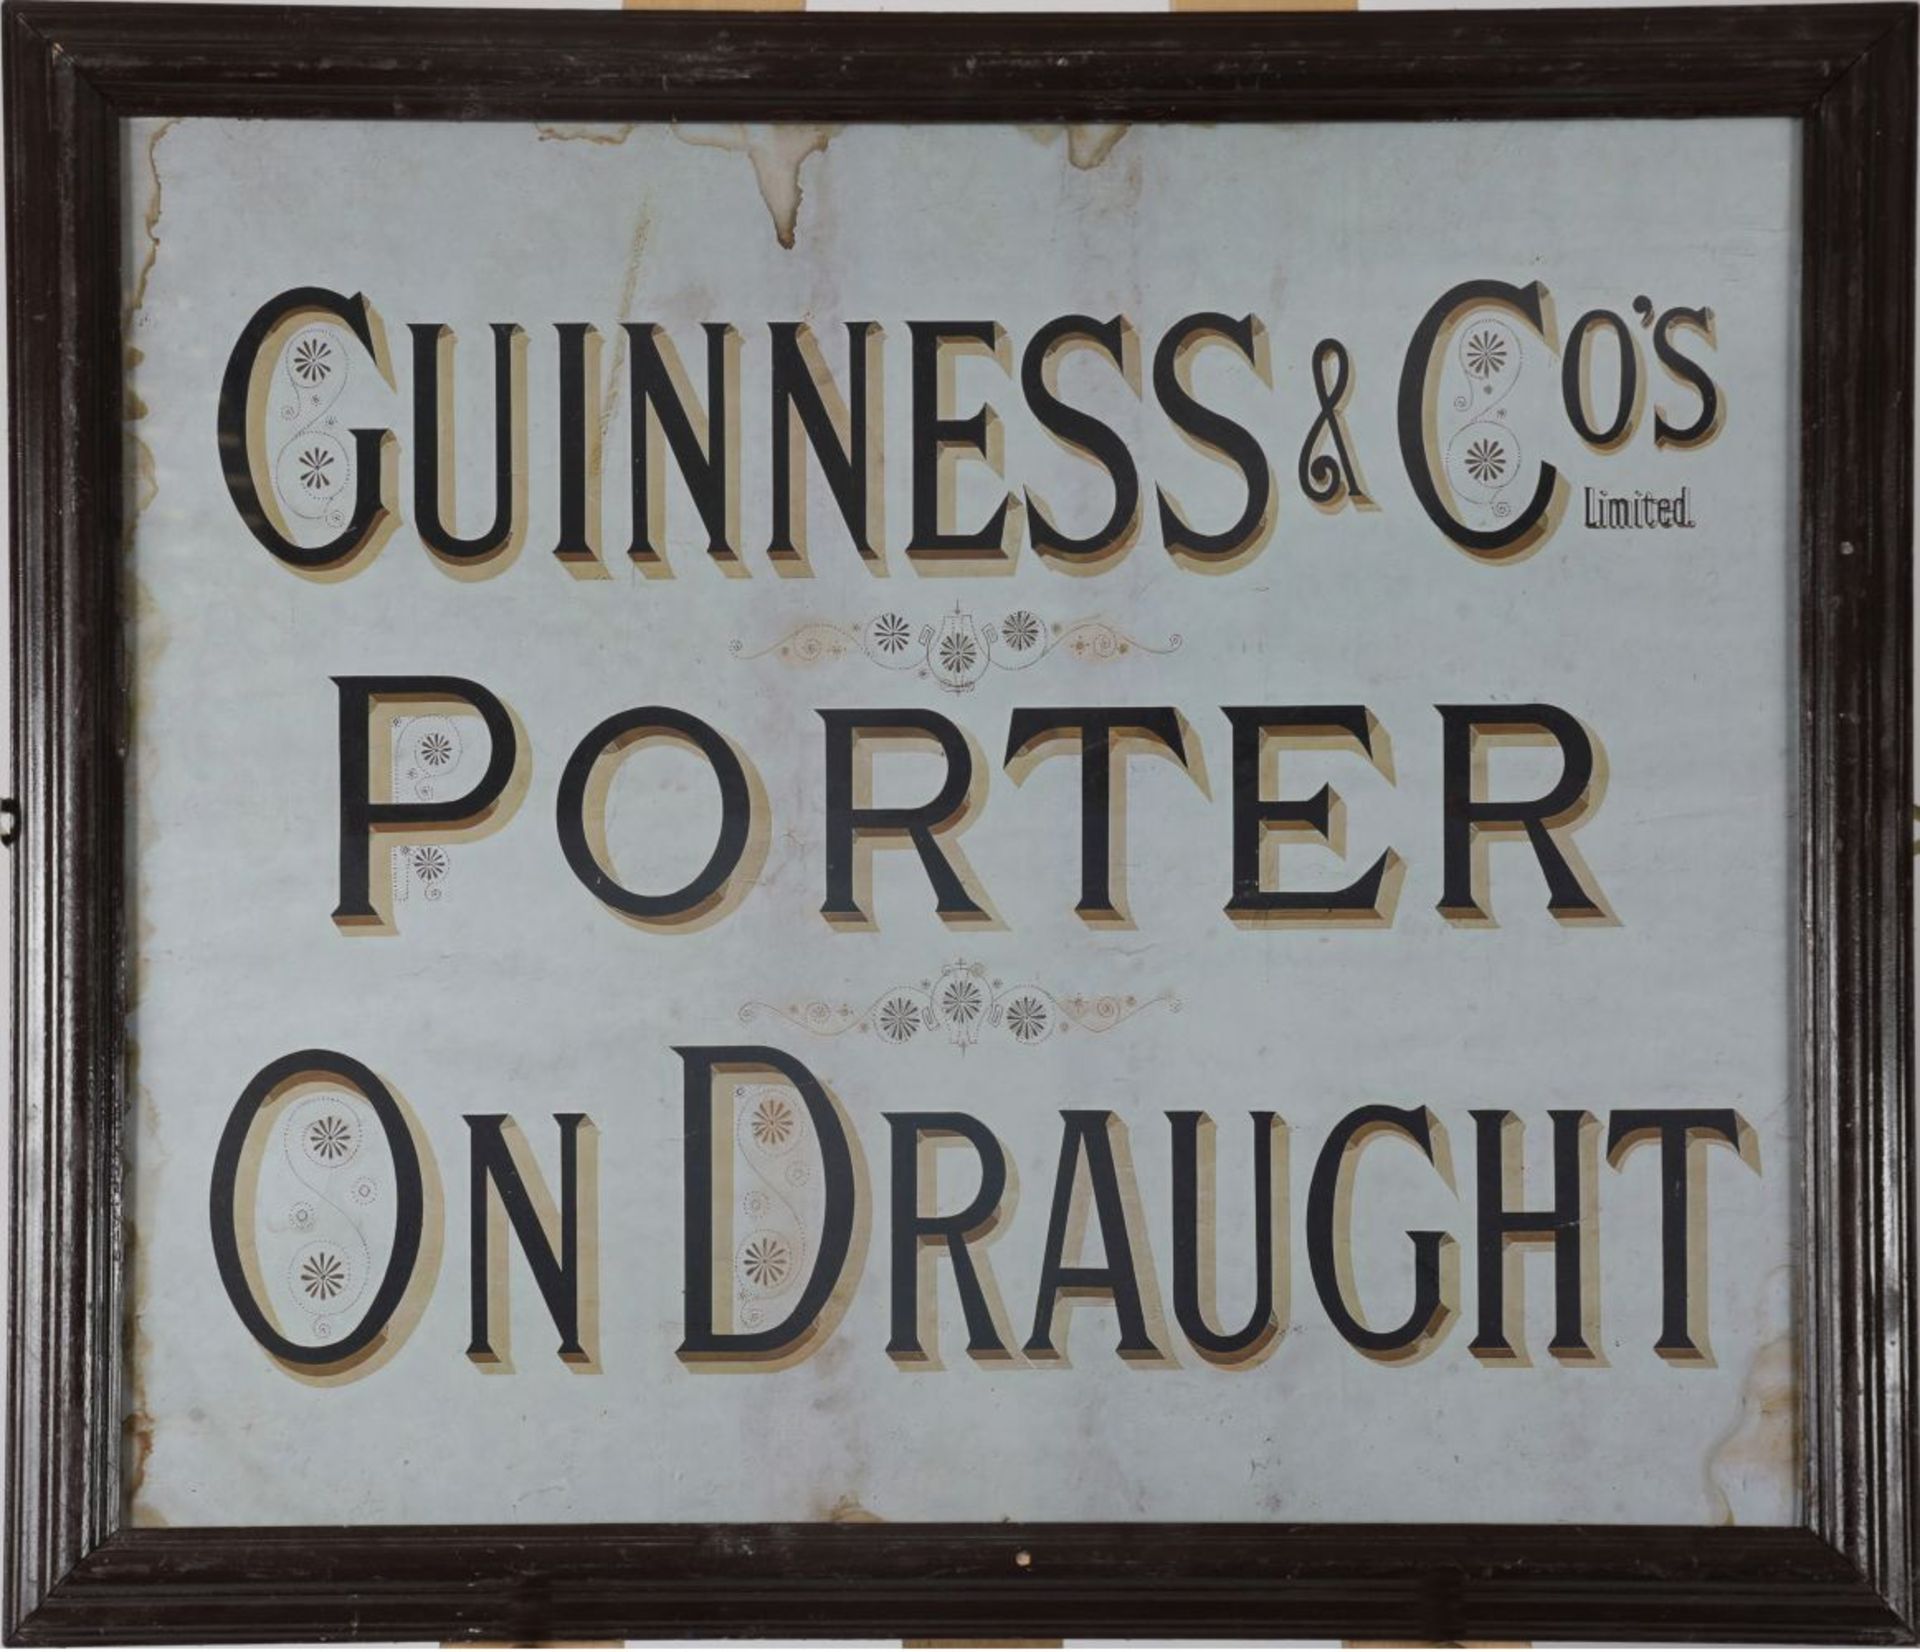 VINTAGE GUINNESS ADVERTISEMENT POSTER - Image 2 of 3